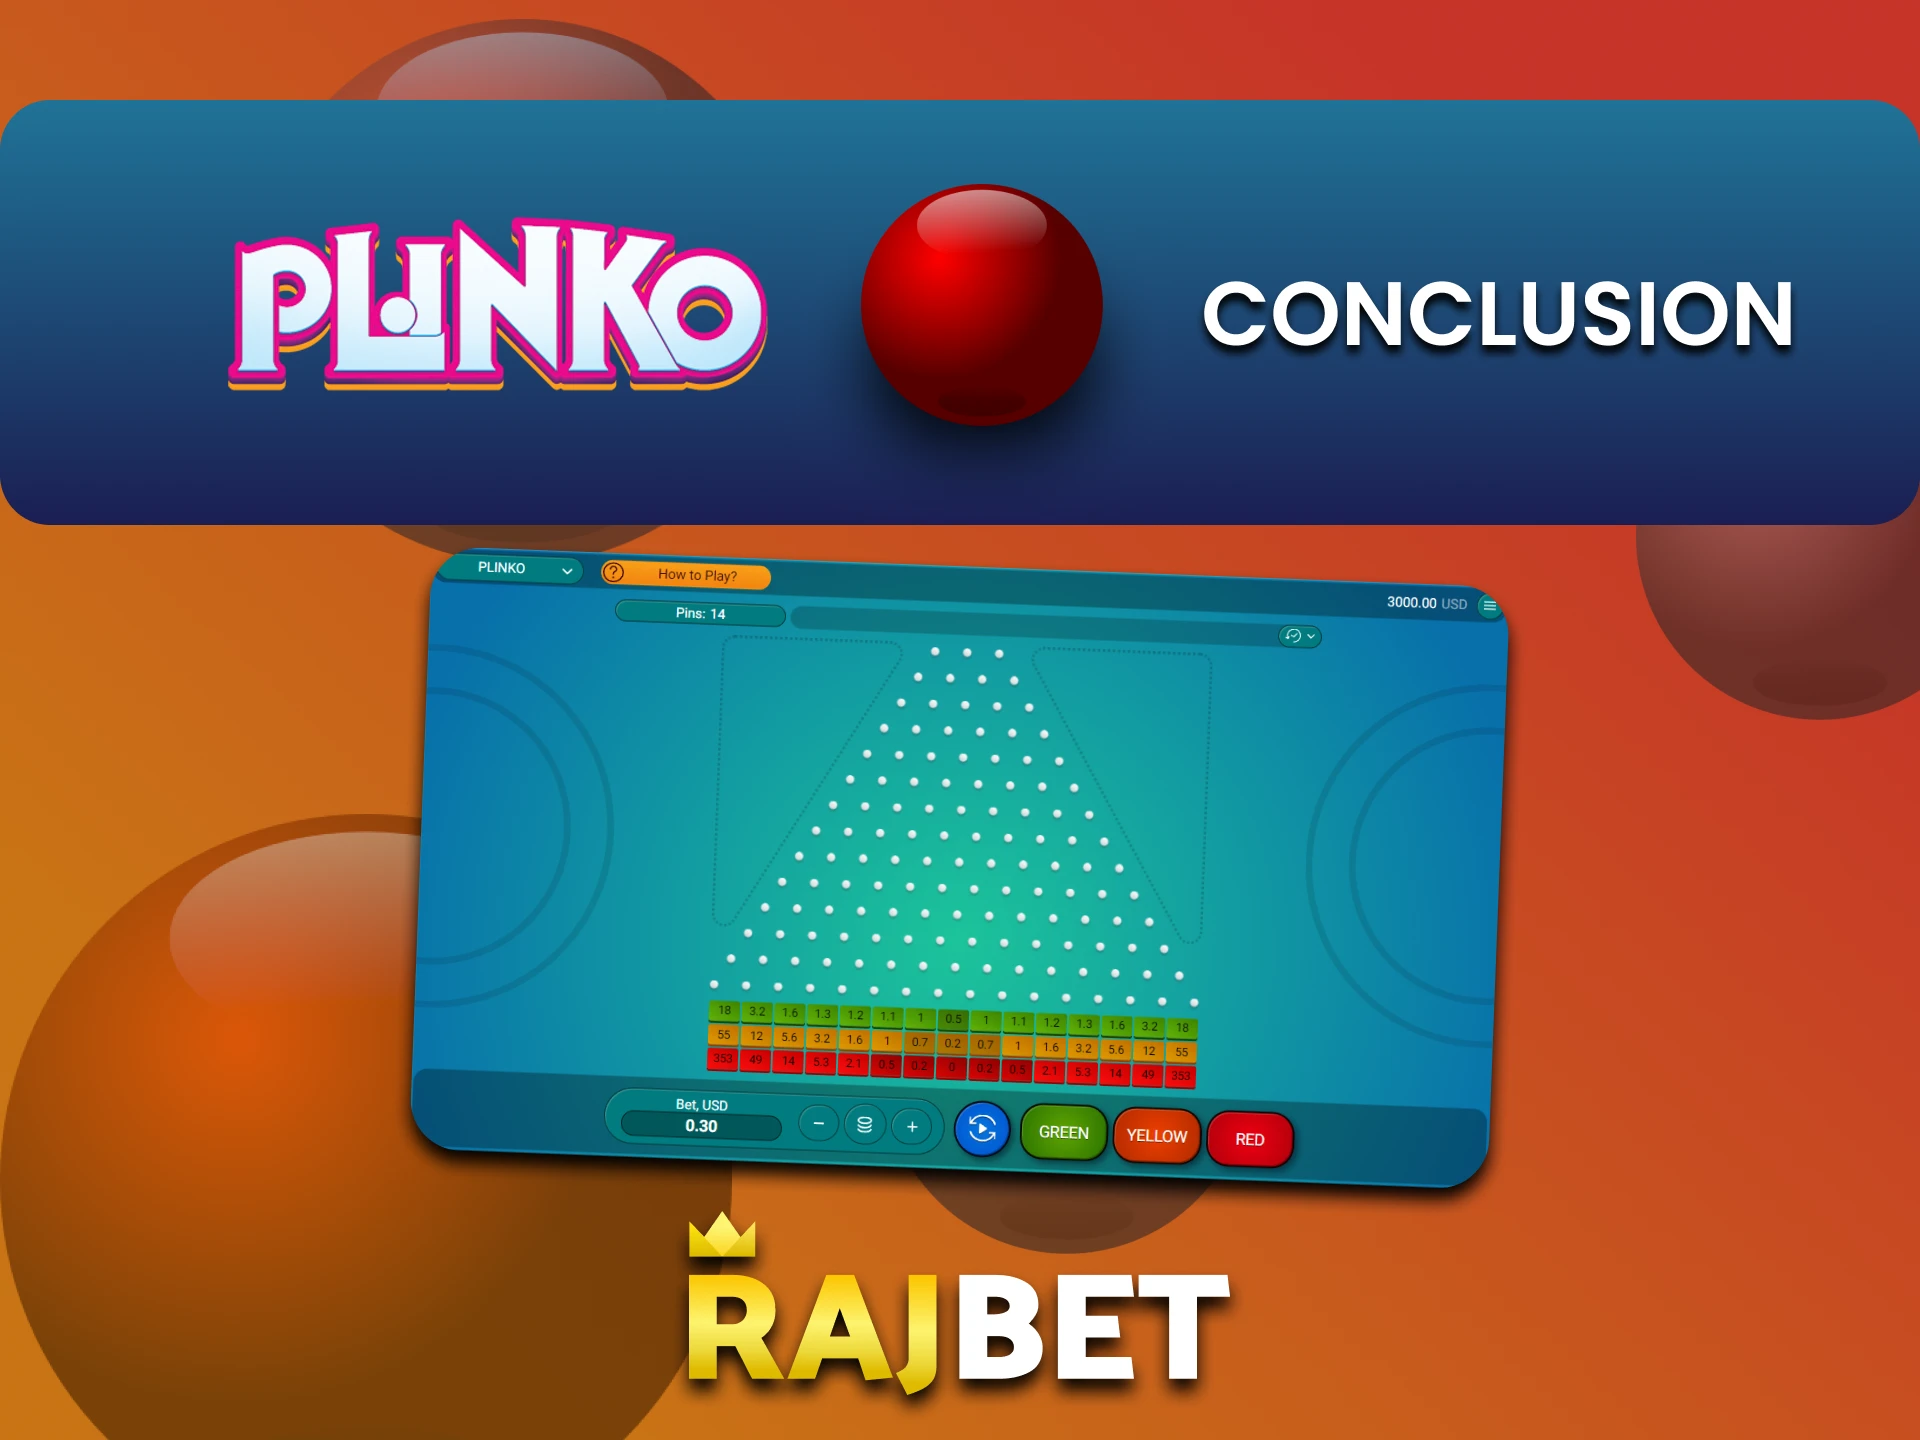 Rajbet is perfect for playing Plinko.